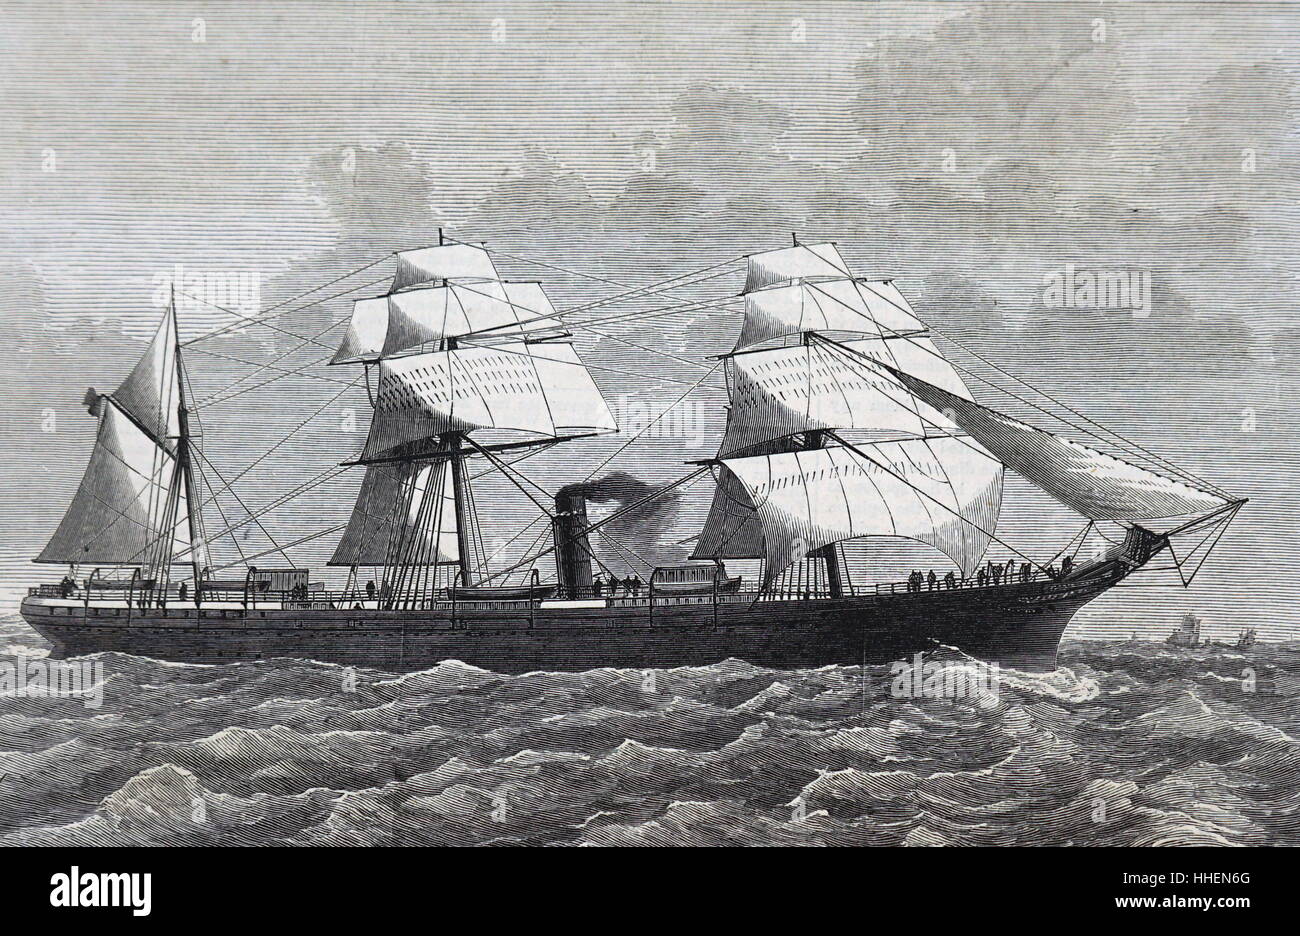 Illustration depicting the 'Alfonso XII' steamship. Dated 19th Century Stock Photo